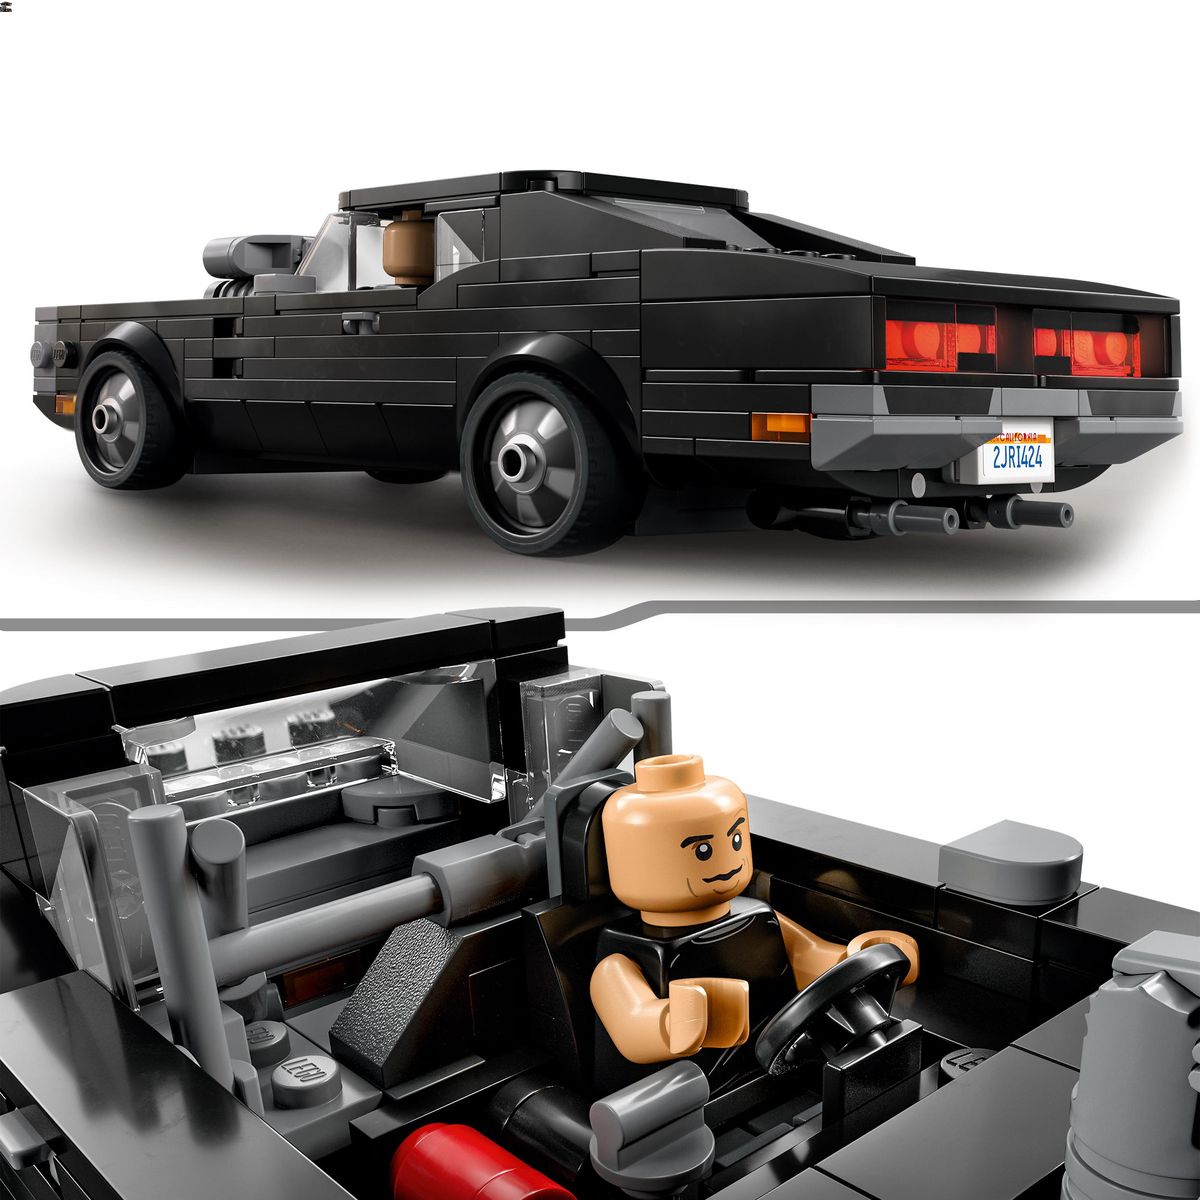 Lego-speed-champions-76912-fast-furious-1970-dodget-charger-feature3